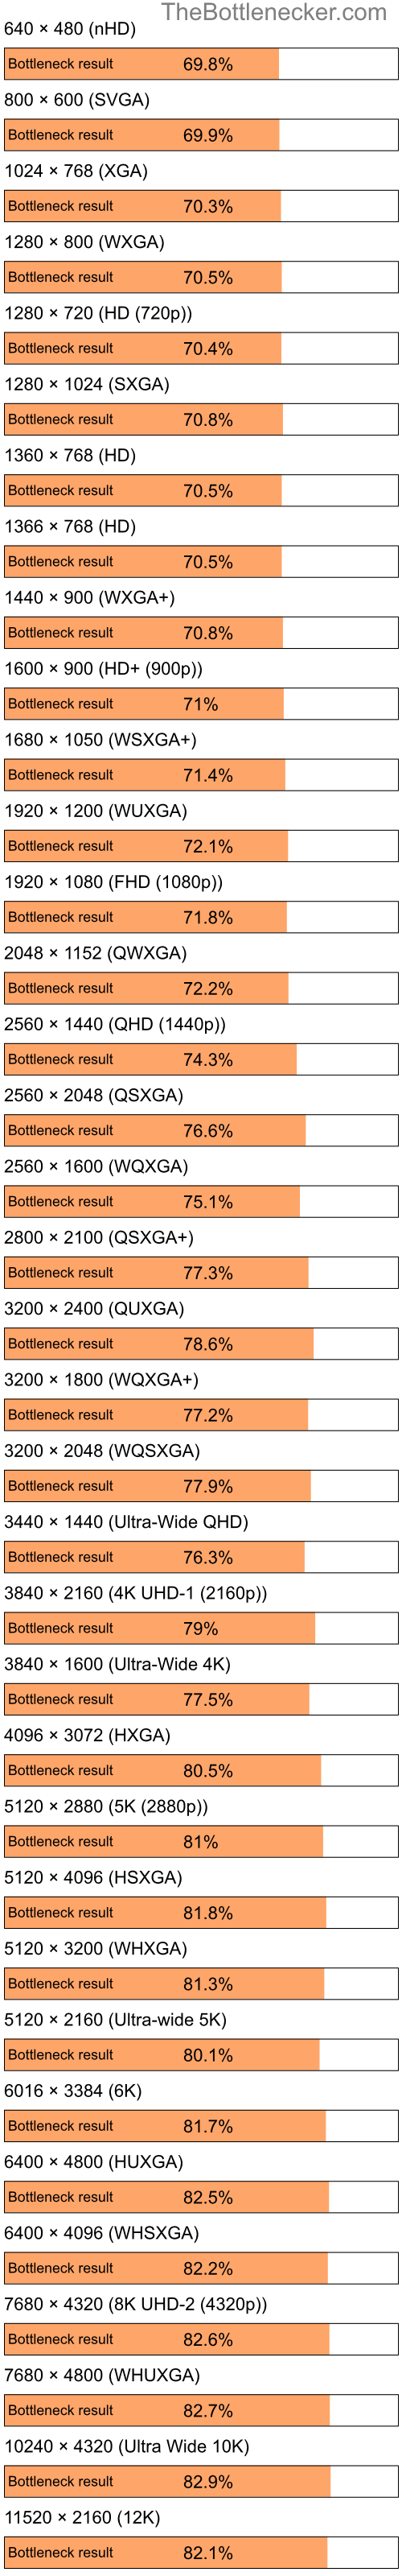 Bottleneck results by resolution for Intel Celeron M 420 and NVIDIA Quadro FX 3400 in Graphic Card Intense Tasks